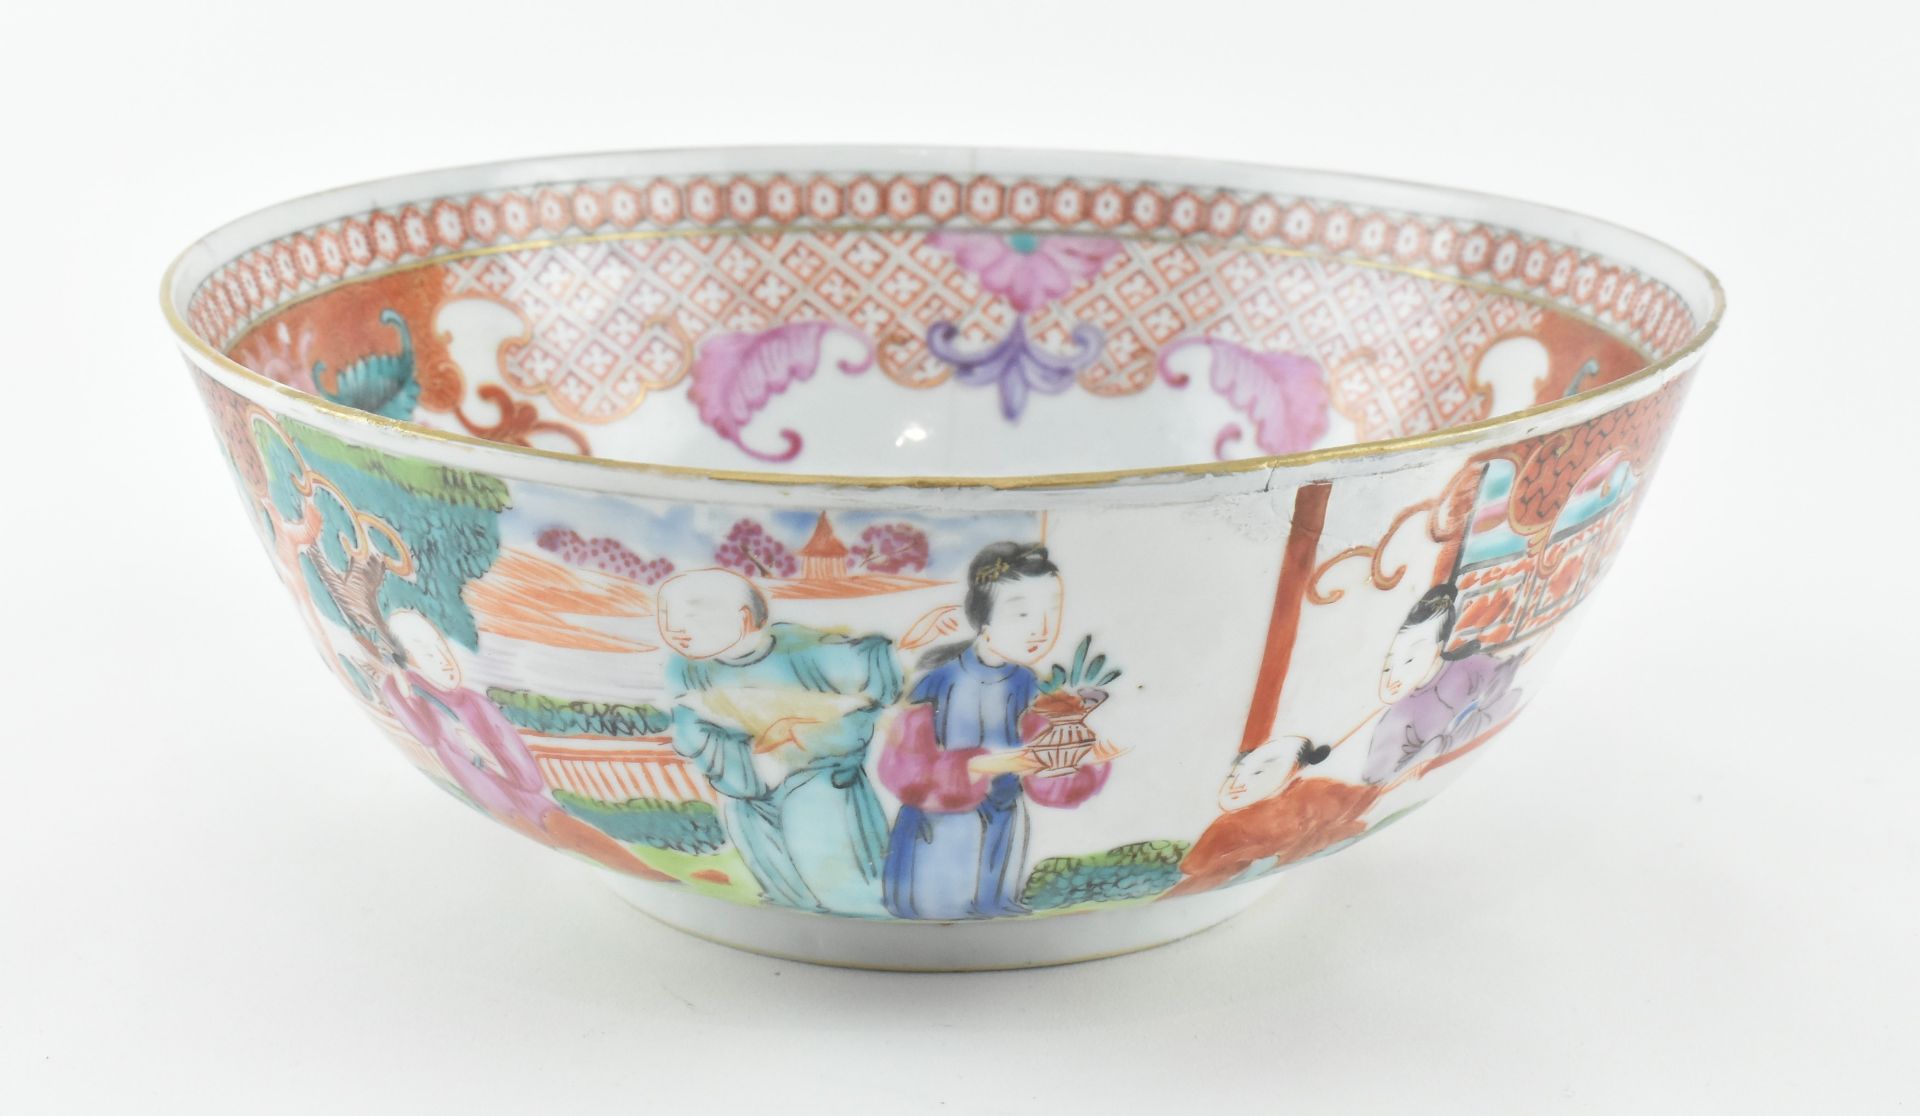 QING DYNASTY FAMILLE ROSE FIGURINE BOWL 清 粉彩人物碗